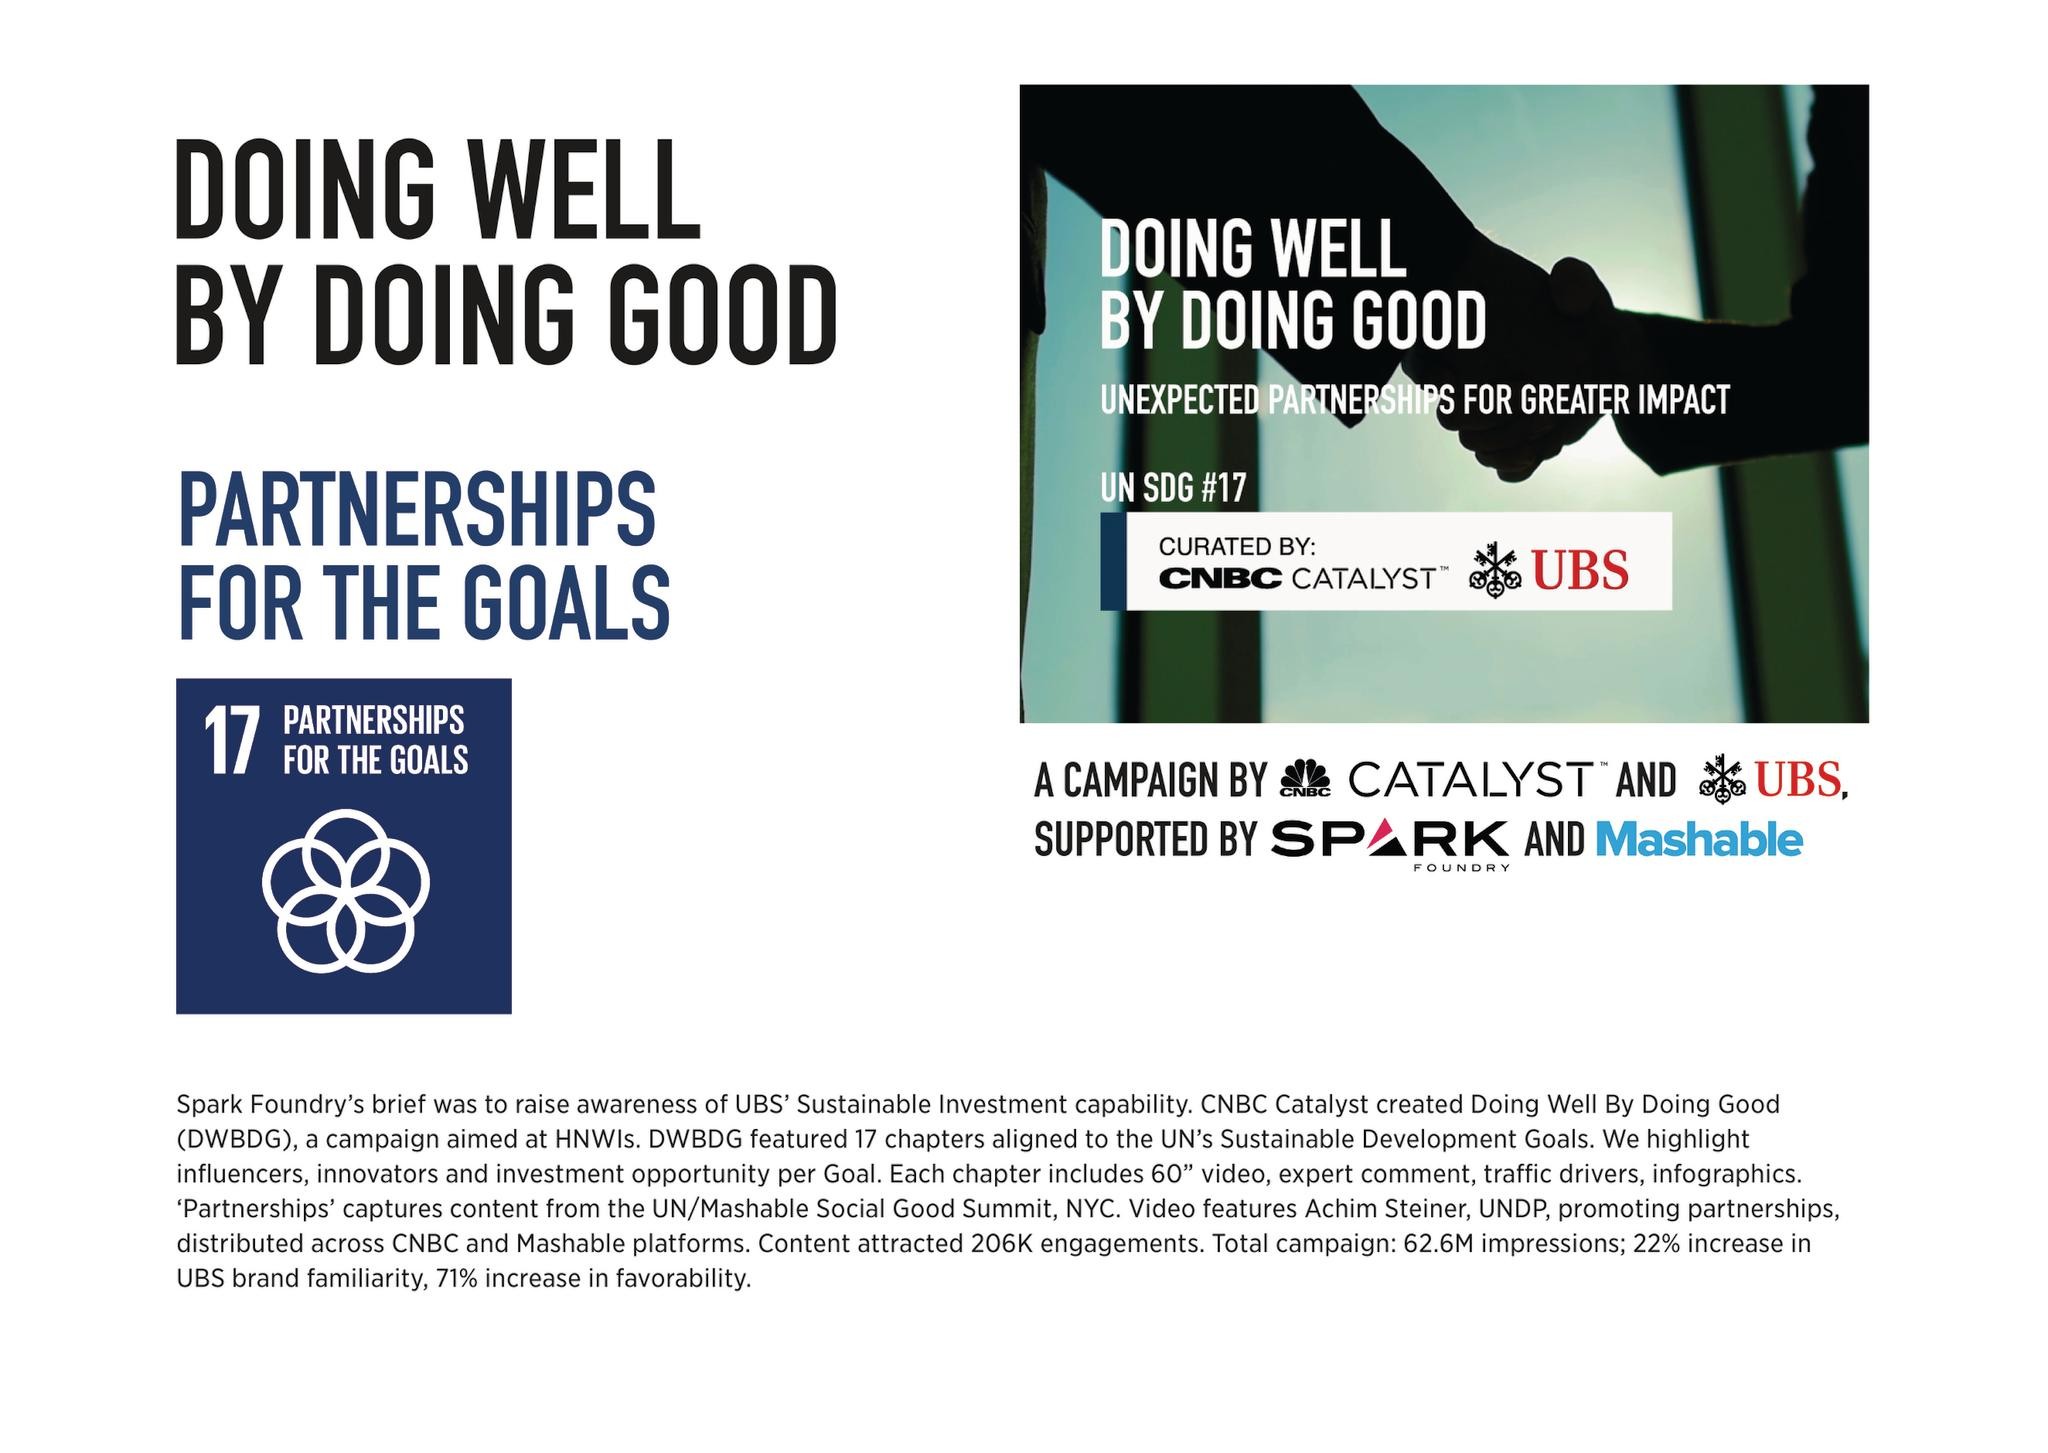 Doing Well by Doing Good - Partnerships for the Goals